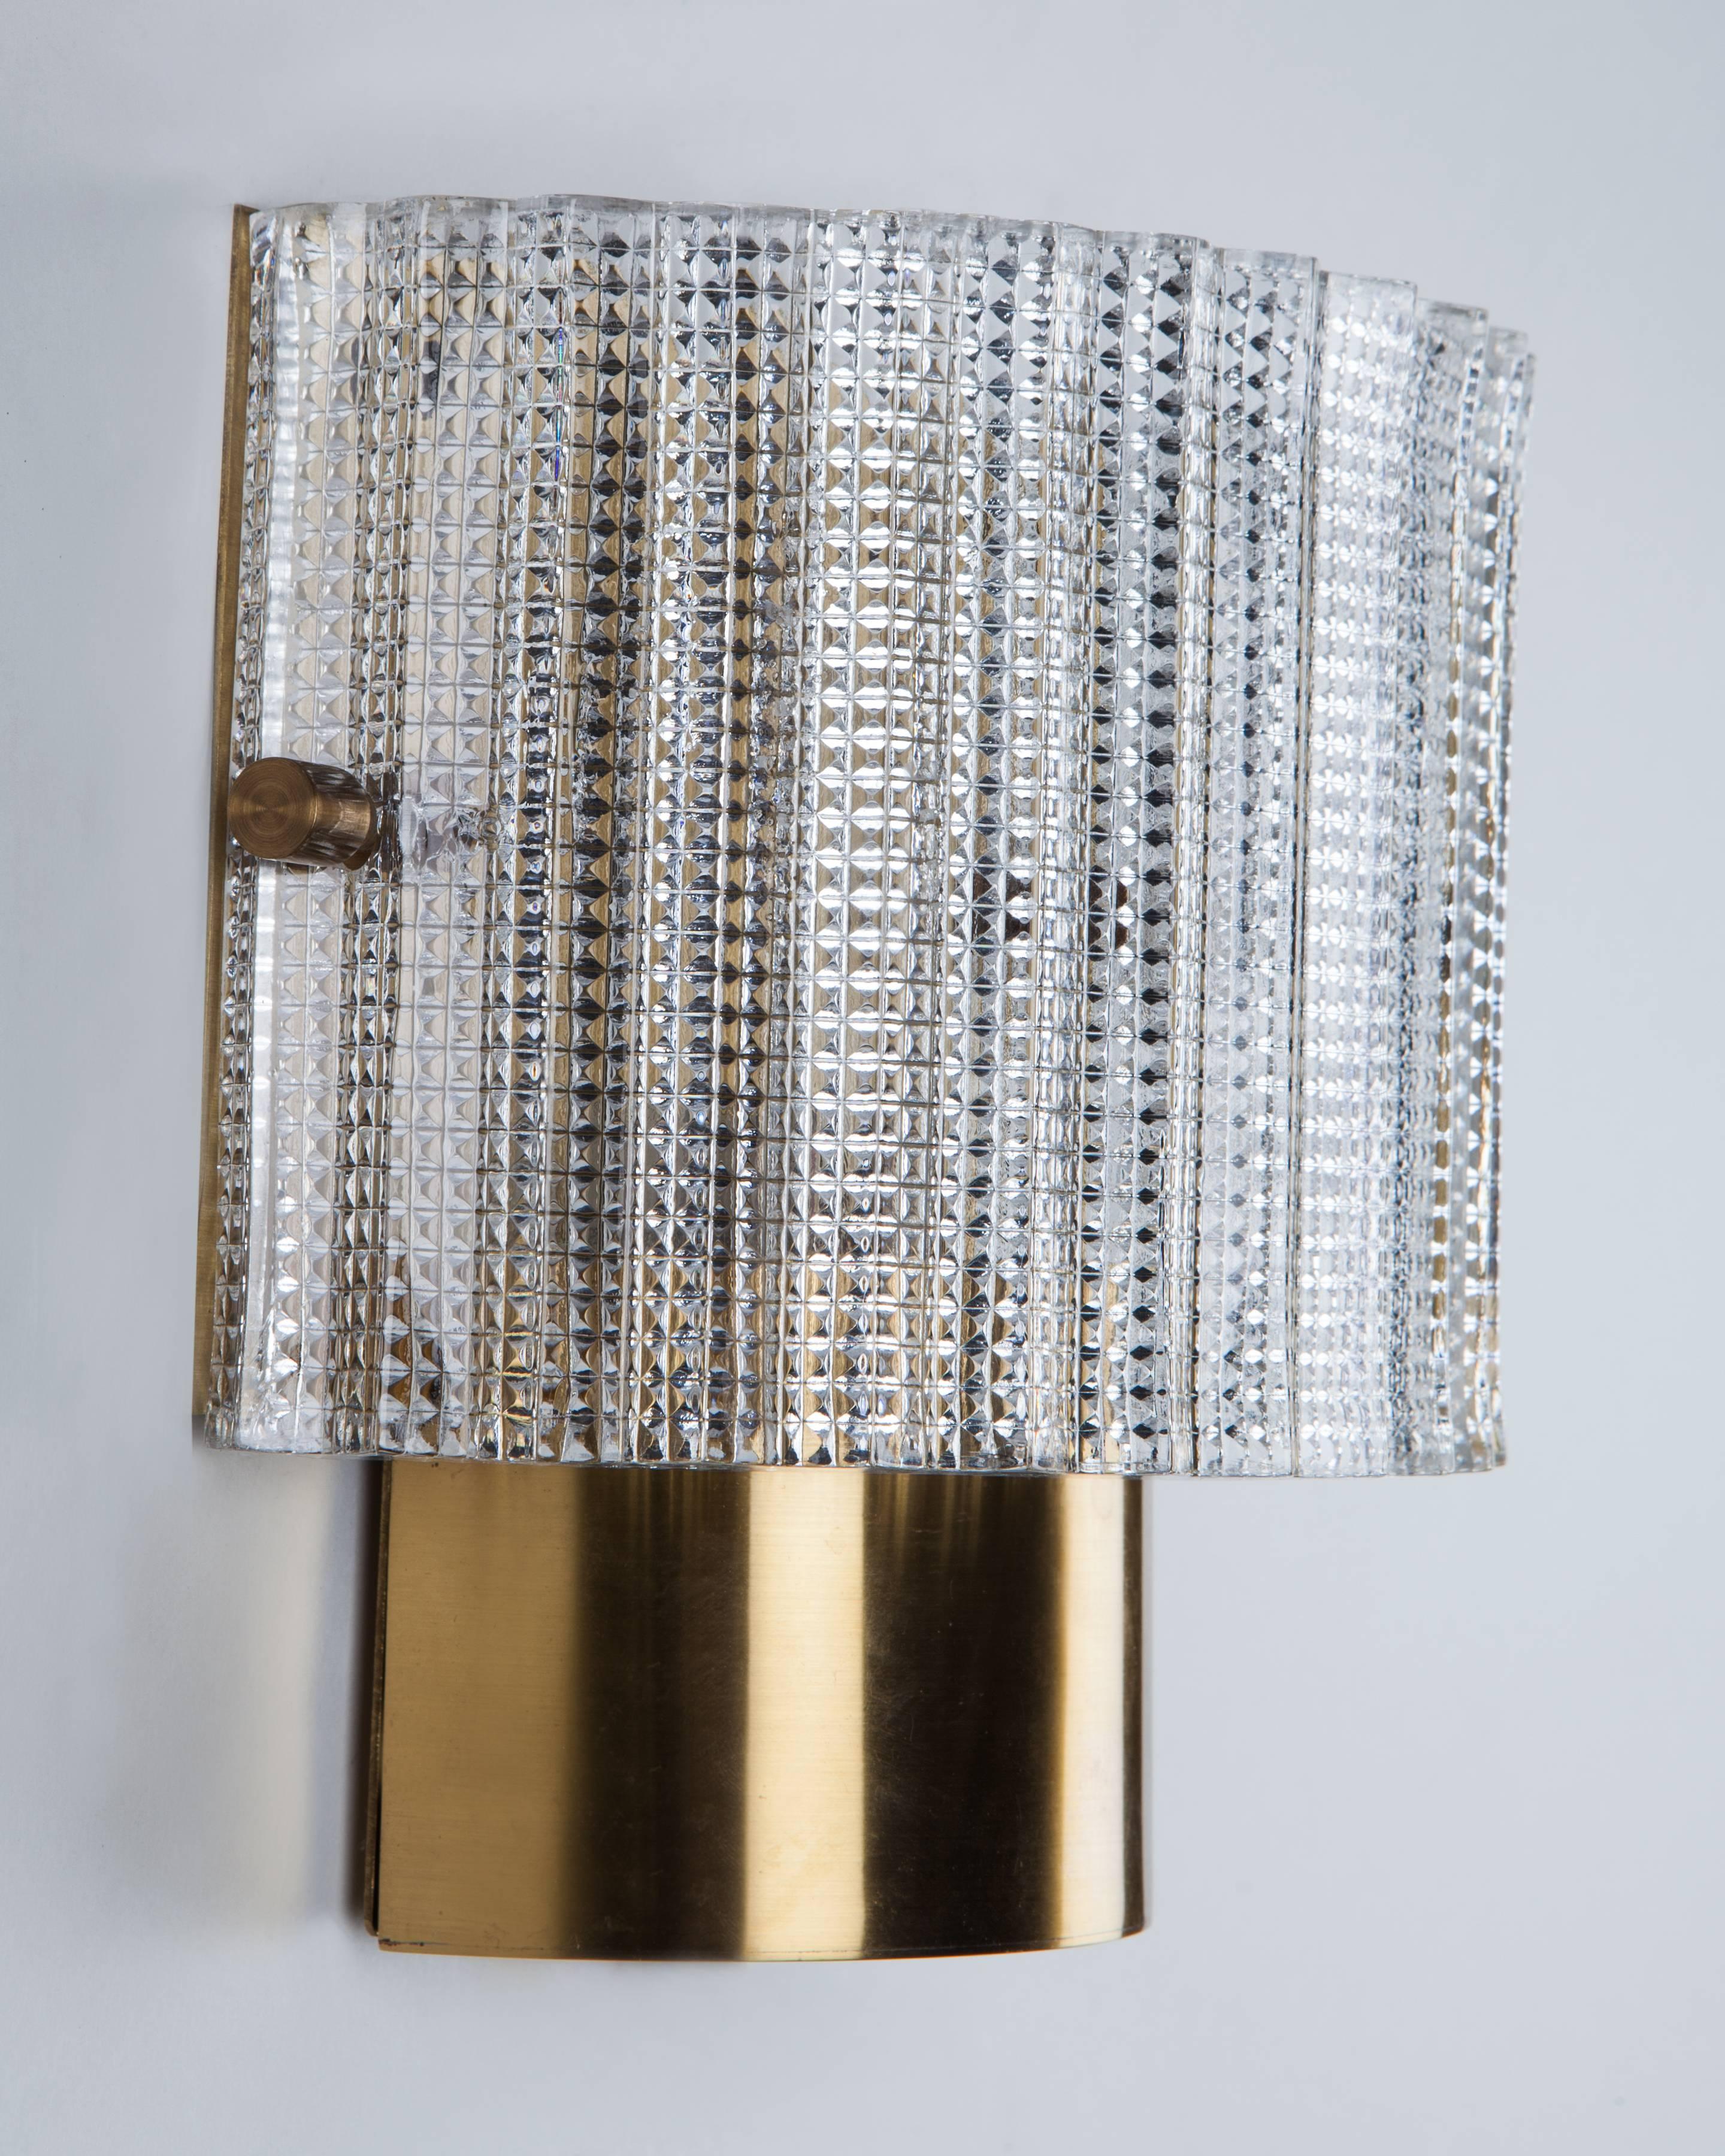 AIS3025
A pair of semi-cylindrical textured glass wall lights on aged lacquered brass frames. Signed by the Swedish glassmaker Orrefors. Due to the antique nature of this fixture, there may be some nicks or imperfections in the